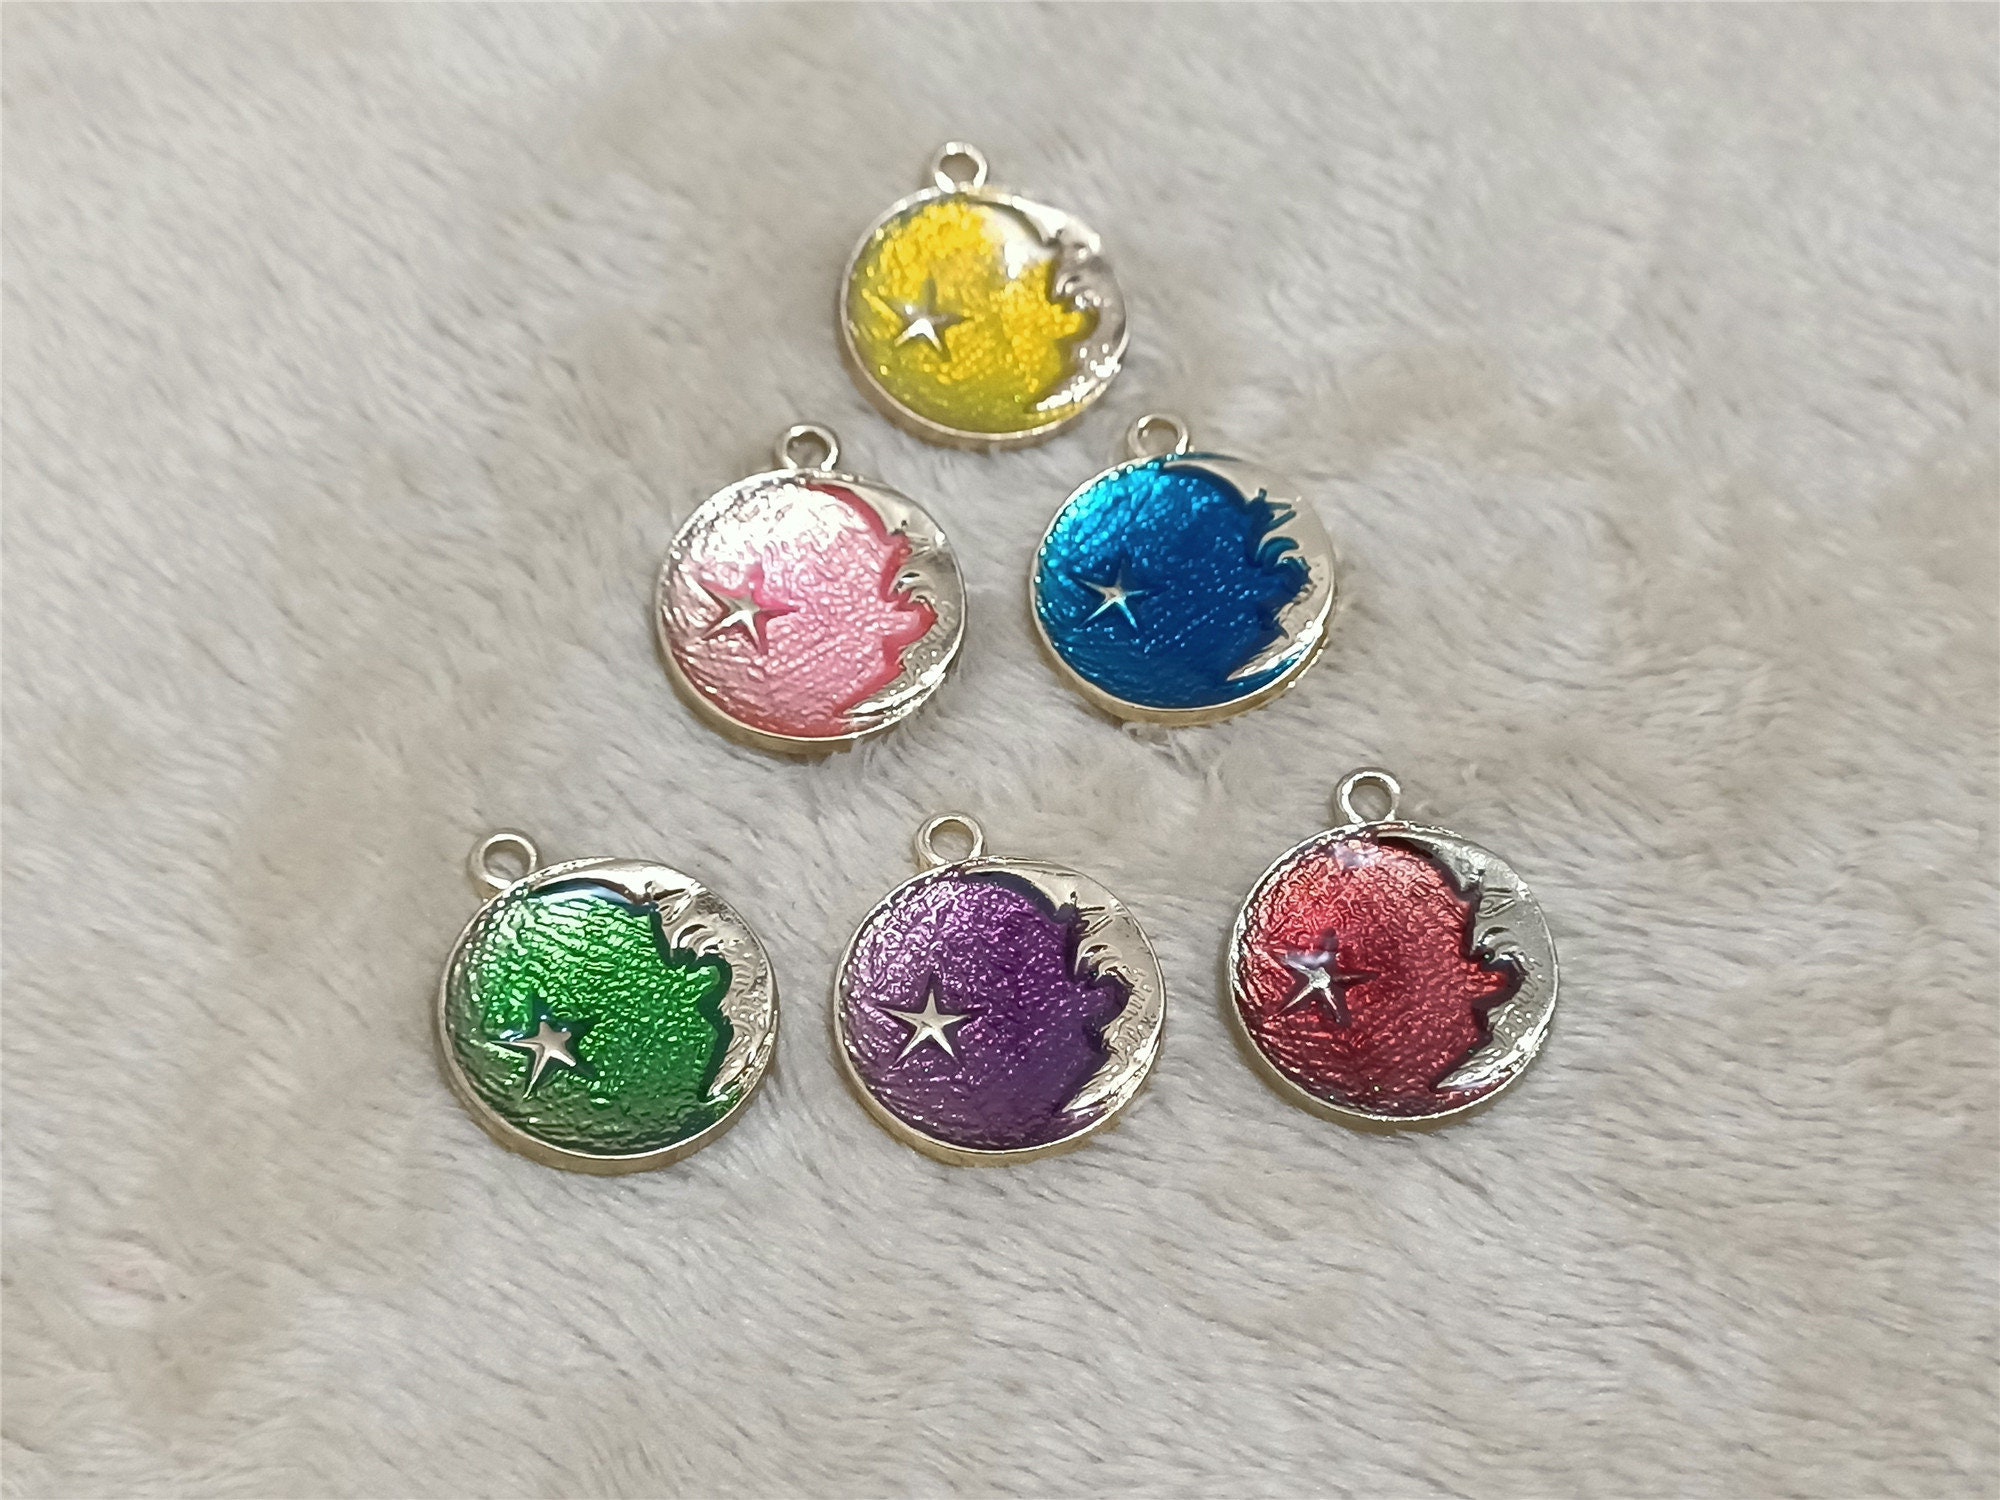 10pcs Enamel Cute Charms Pendant for Jewelry Making Supplies Moon